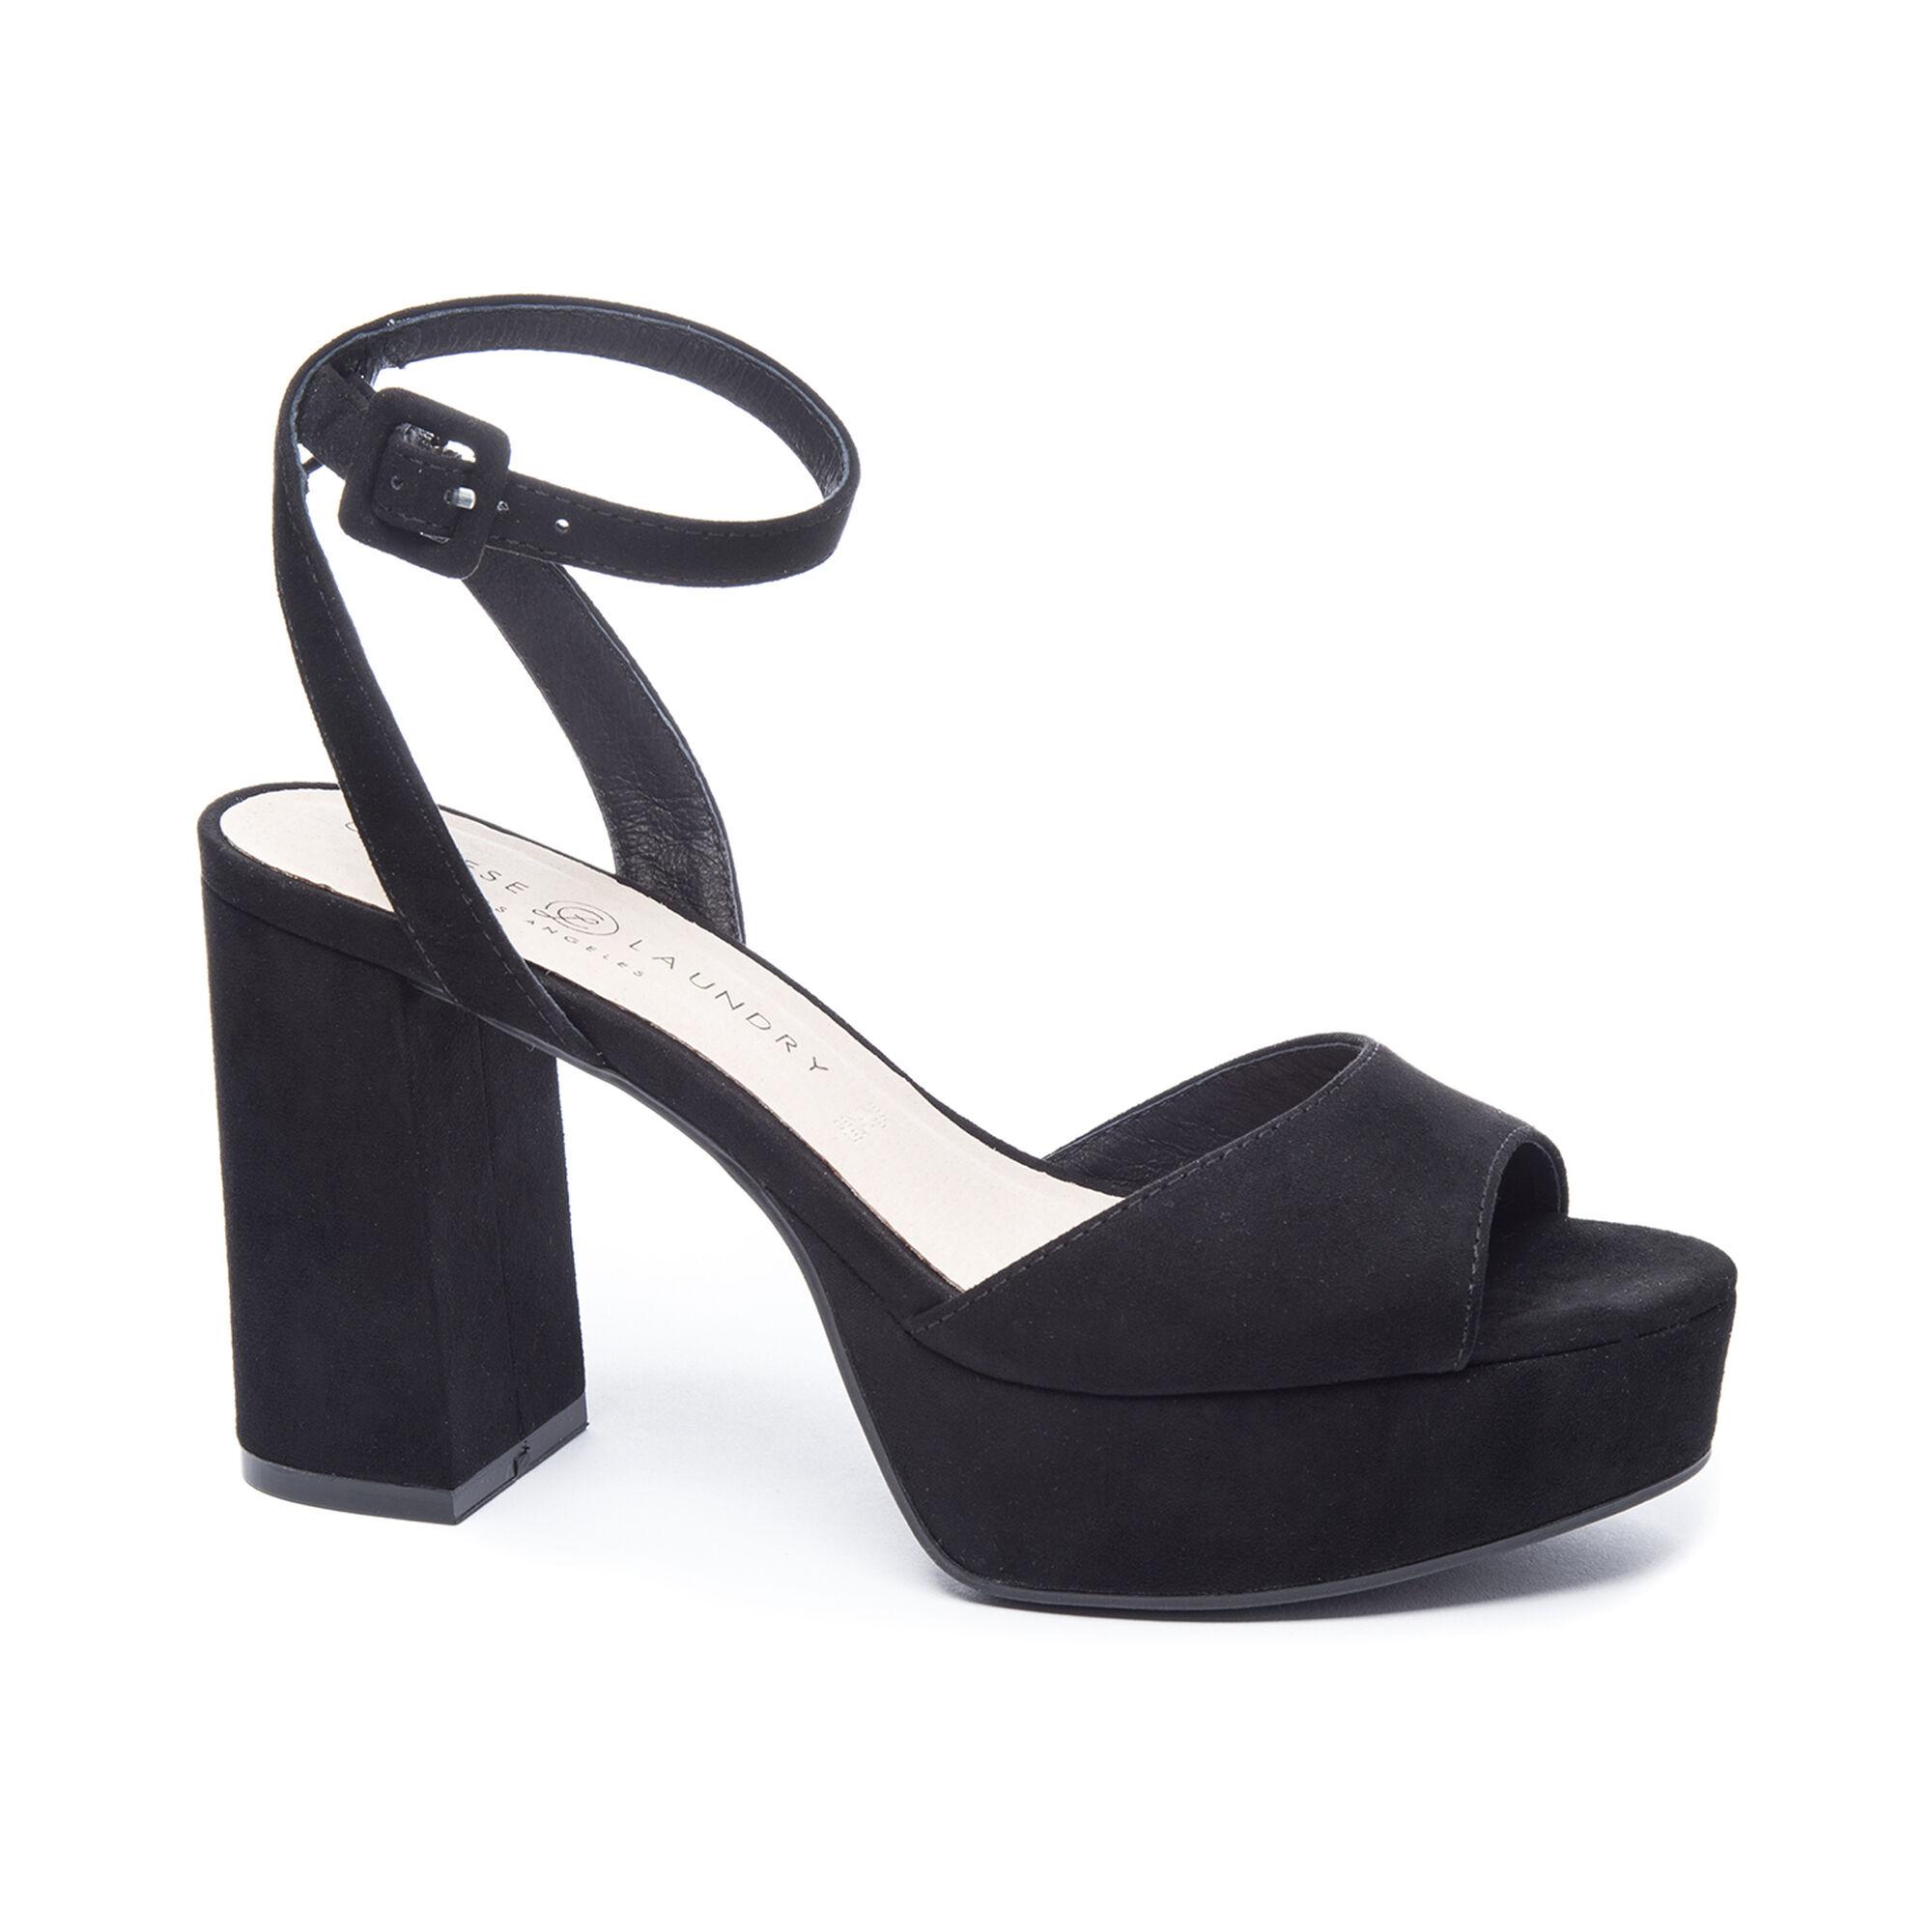 Chinese Laundry Theresa Platform Sandal in Black - Save 43% - Lyst